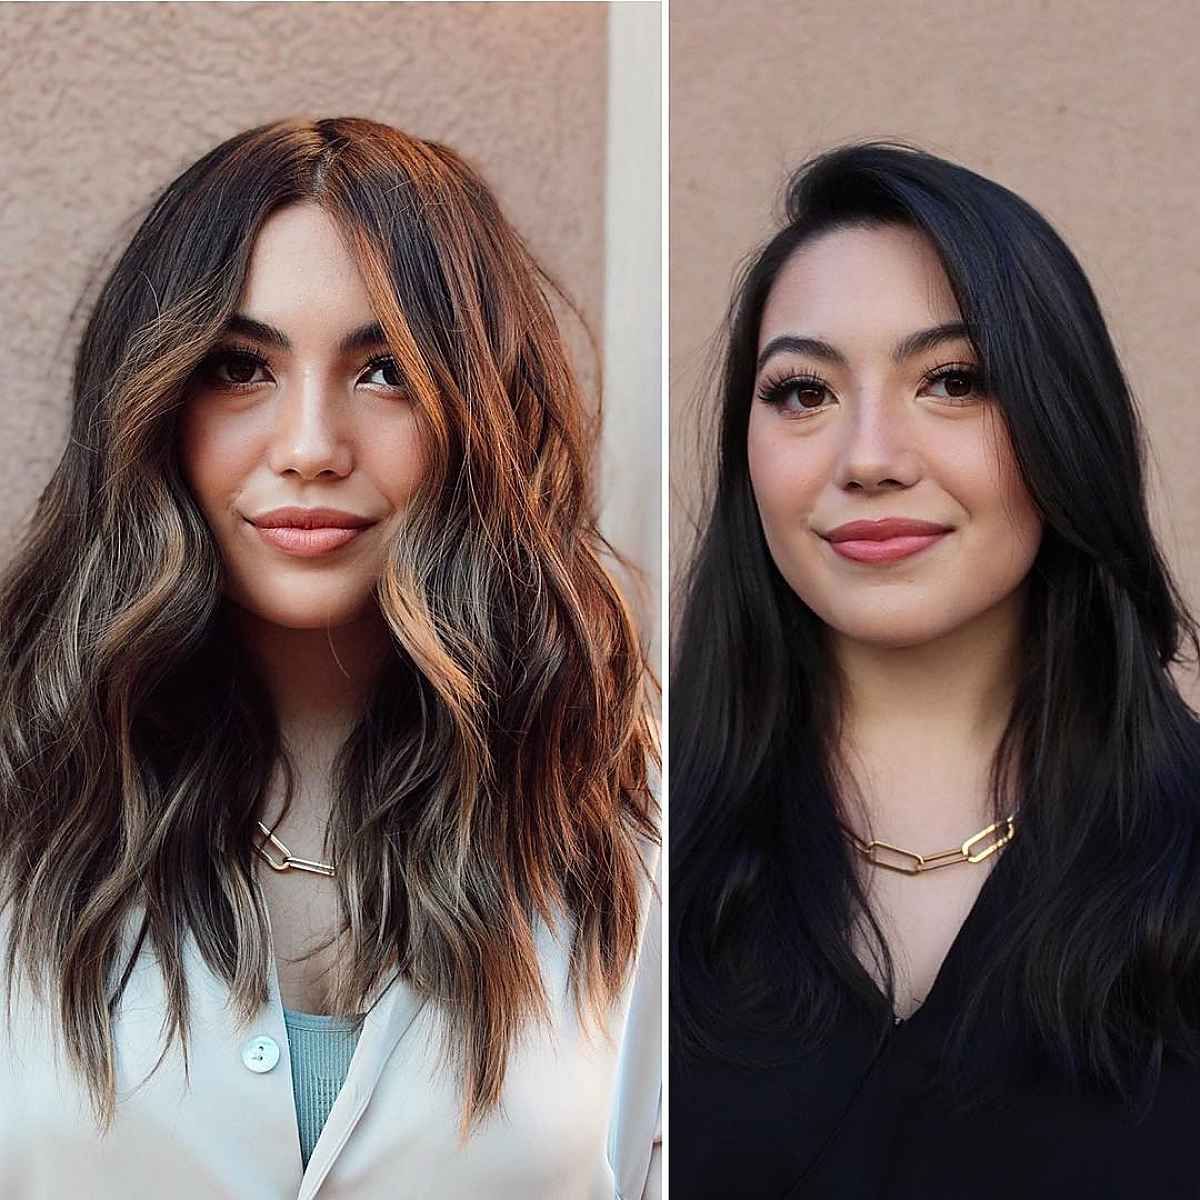 43 Flattering Middle Part Hairstyles Trending Right Now Pertaining To Best And Newest Middle Parted Medium Length Hairstyles (View 12 of 25)